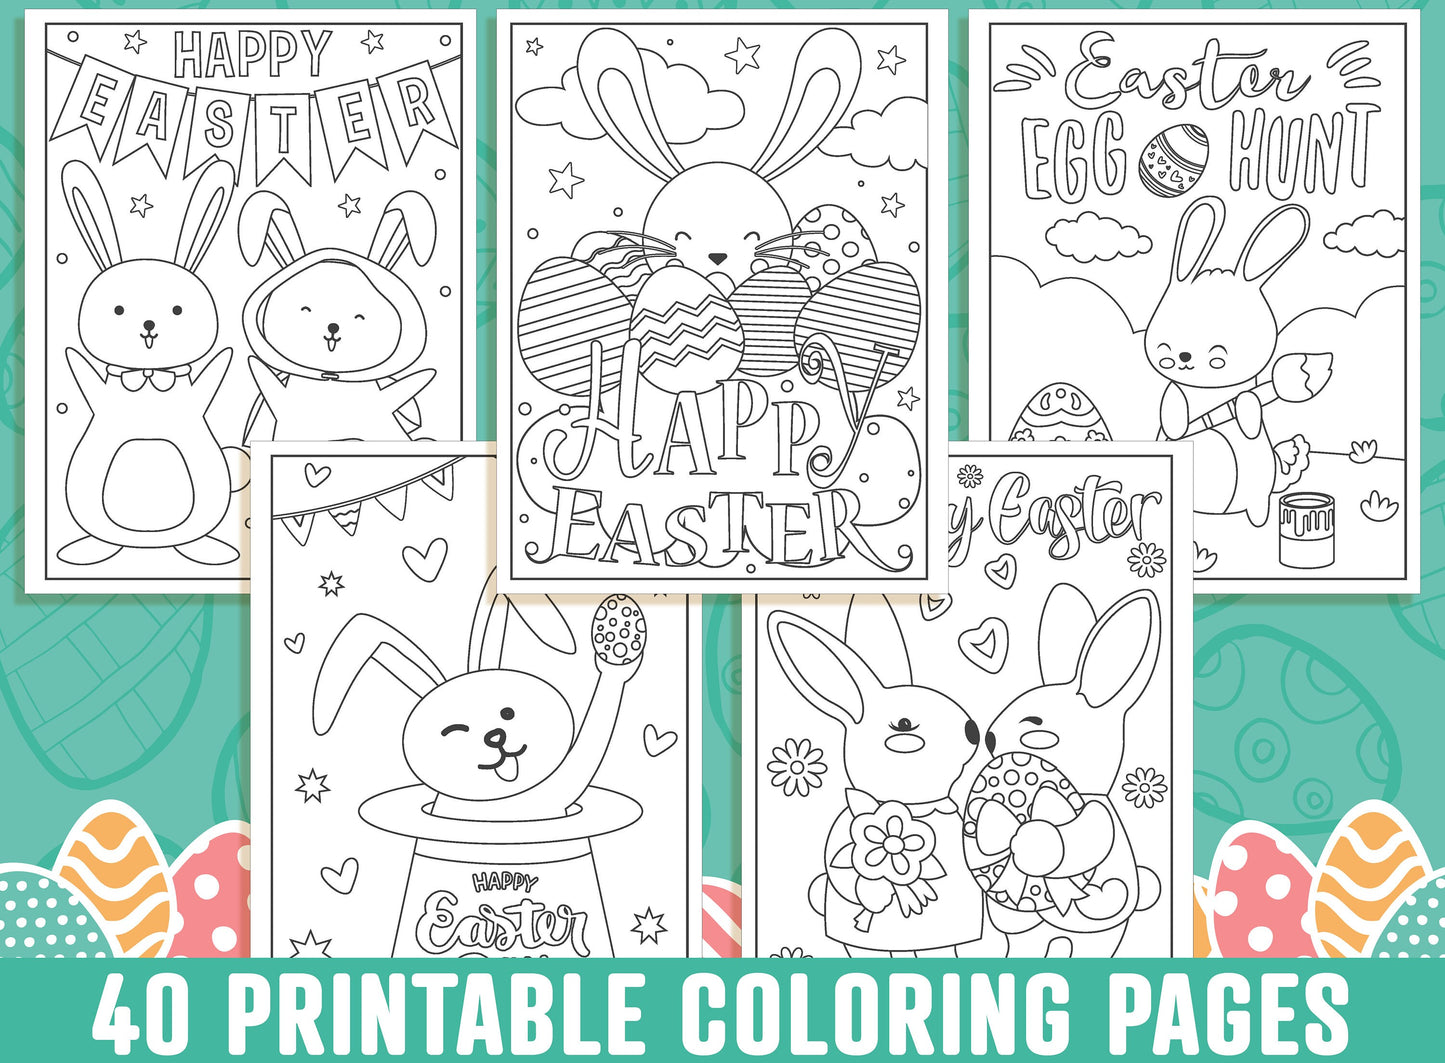 Easter Coloring Pages, 40 Printable Easter Coloring Pages for Kids, Boys, Girls, Teens, Easter Egg Hunt, Rabbit/Bunny, Easter Party Activity